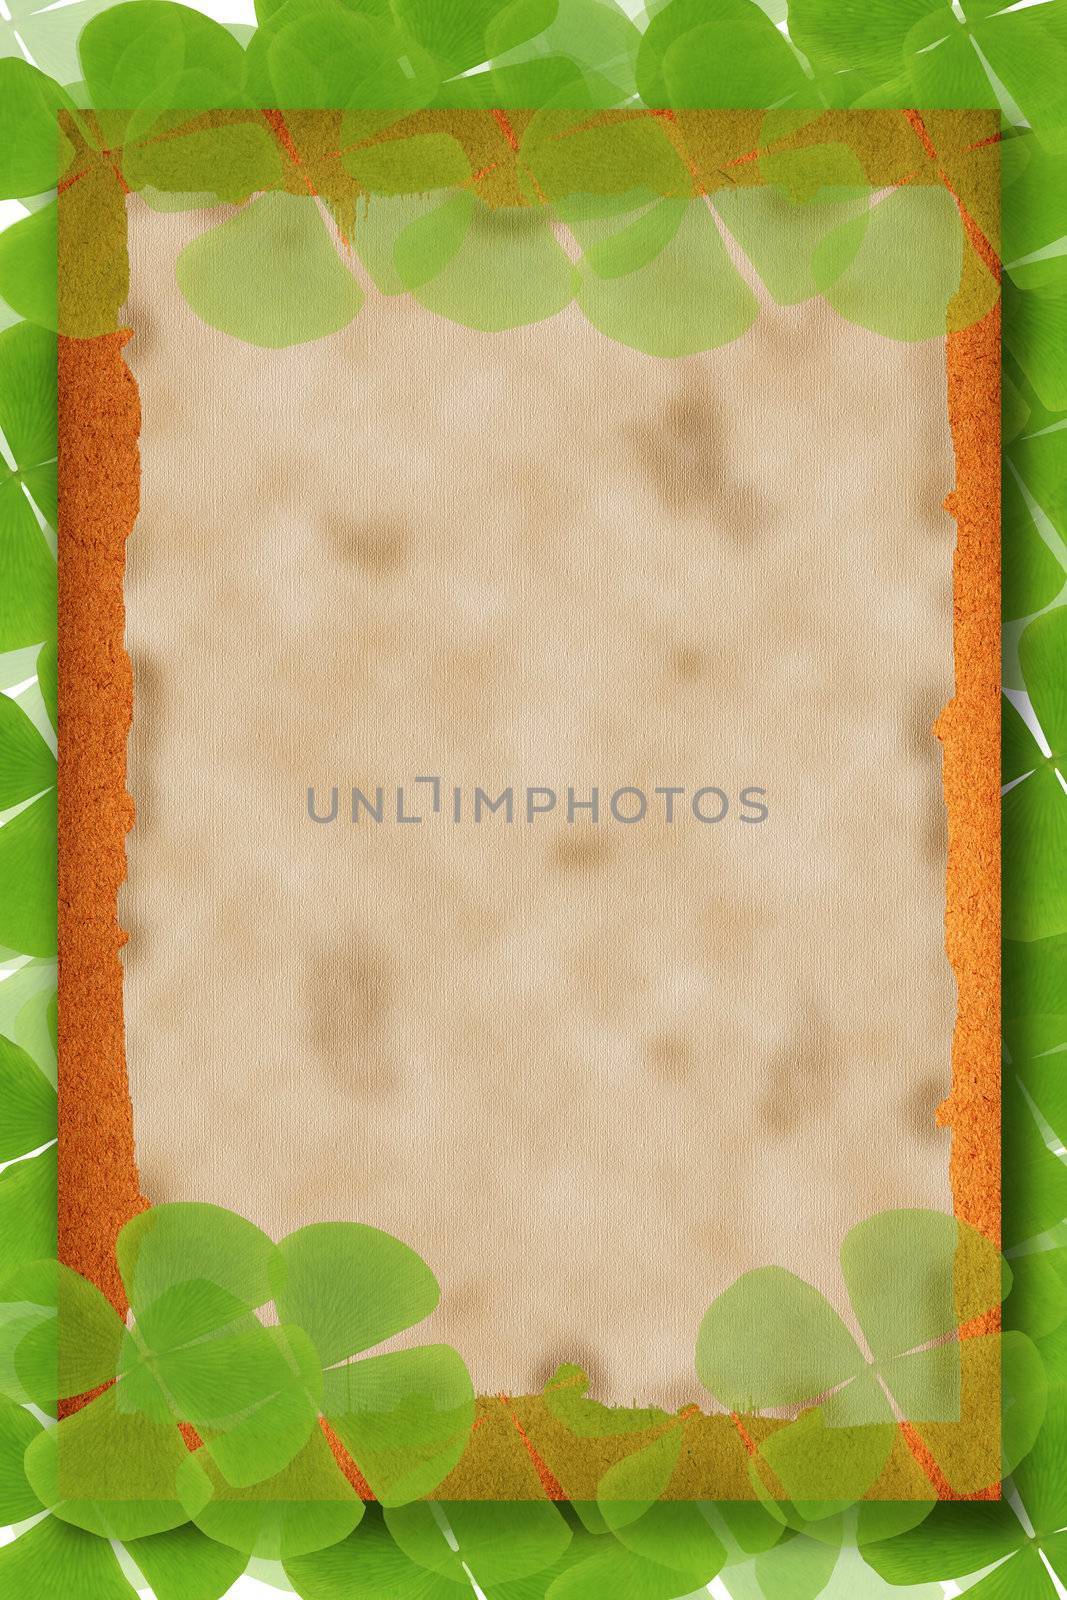 Old paper background with green leaves